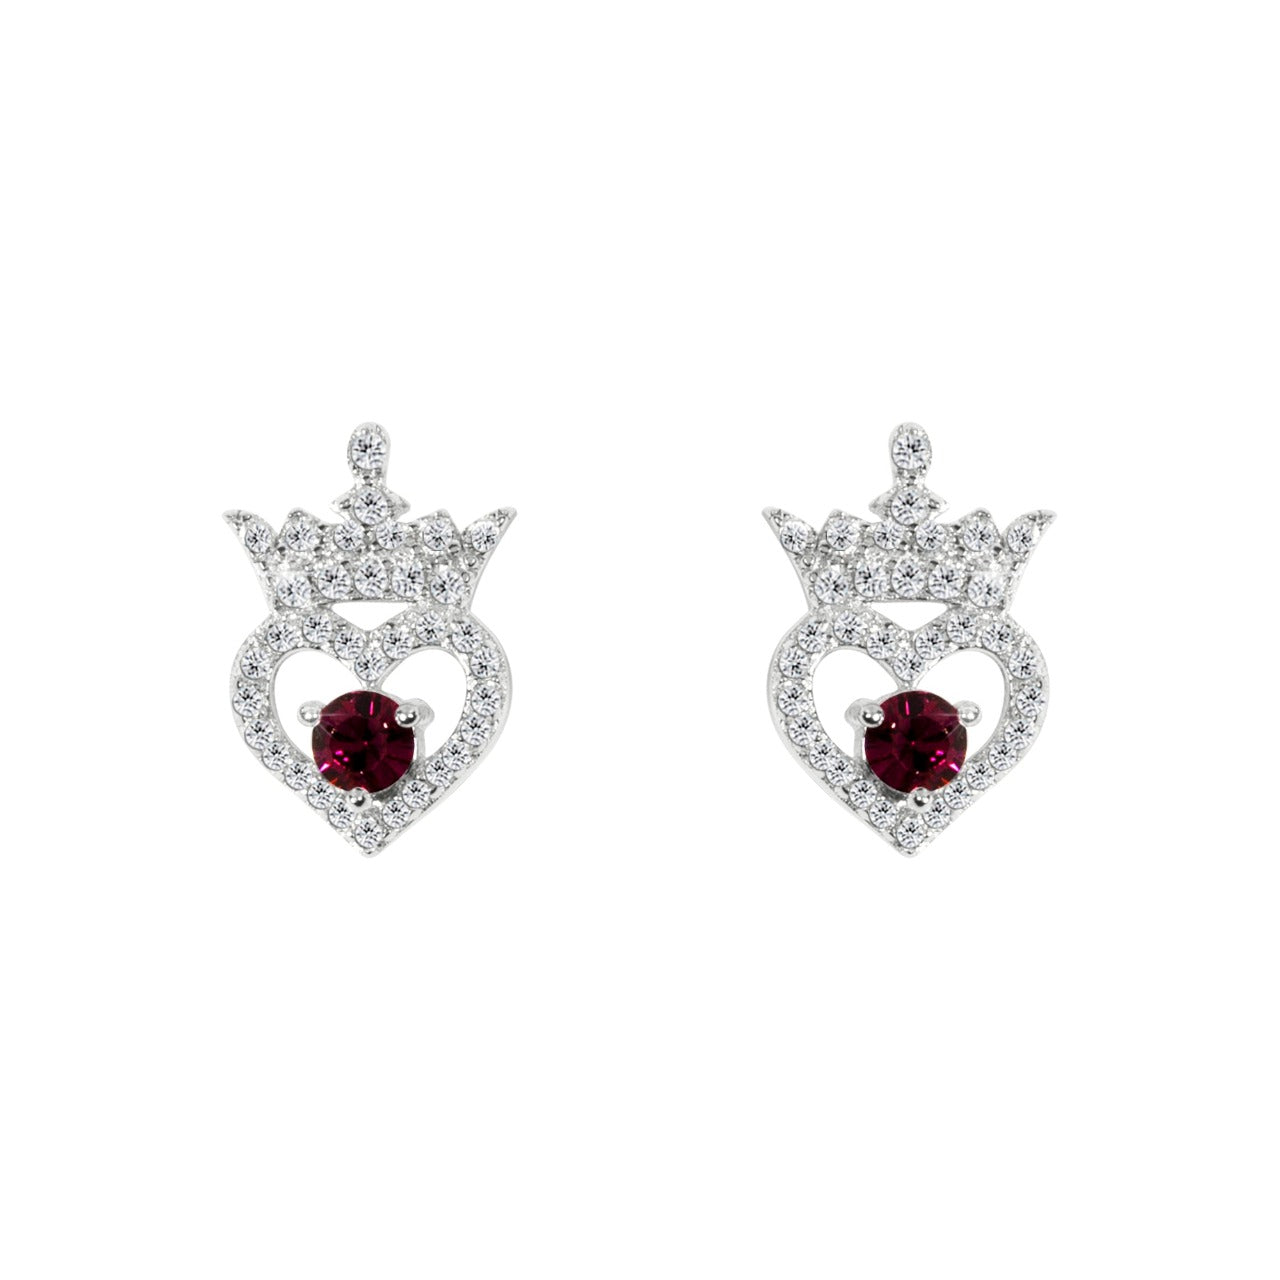 Disney Princess Sterling Silver Birthstone Crown Earrings – January  Beautiful silver Birthstone princess crown earrings with CZ crystals adding a feminine touch to the Disney classic piece of Jewellery.  Trendy and fashionable design, the Disney princess sterling silver earrings add a chic, fun touch to any outfit. the perfect gift for any Disney Princess fan